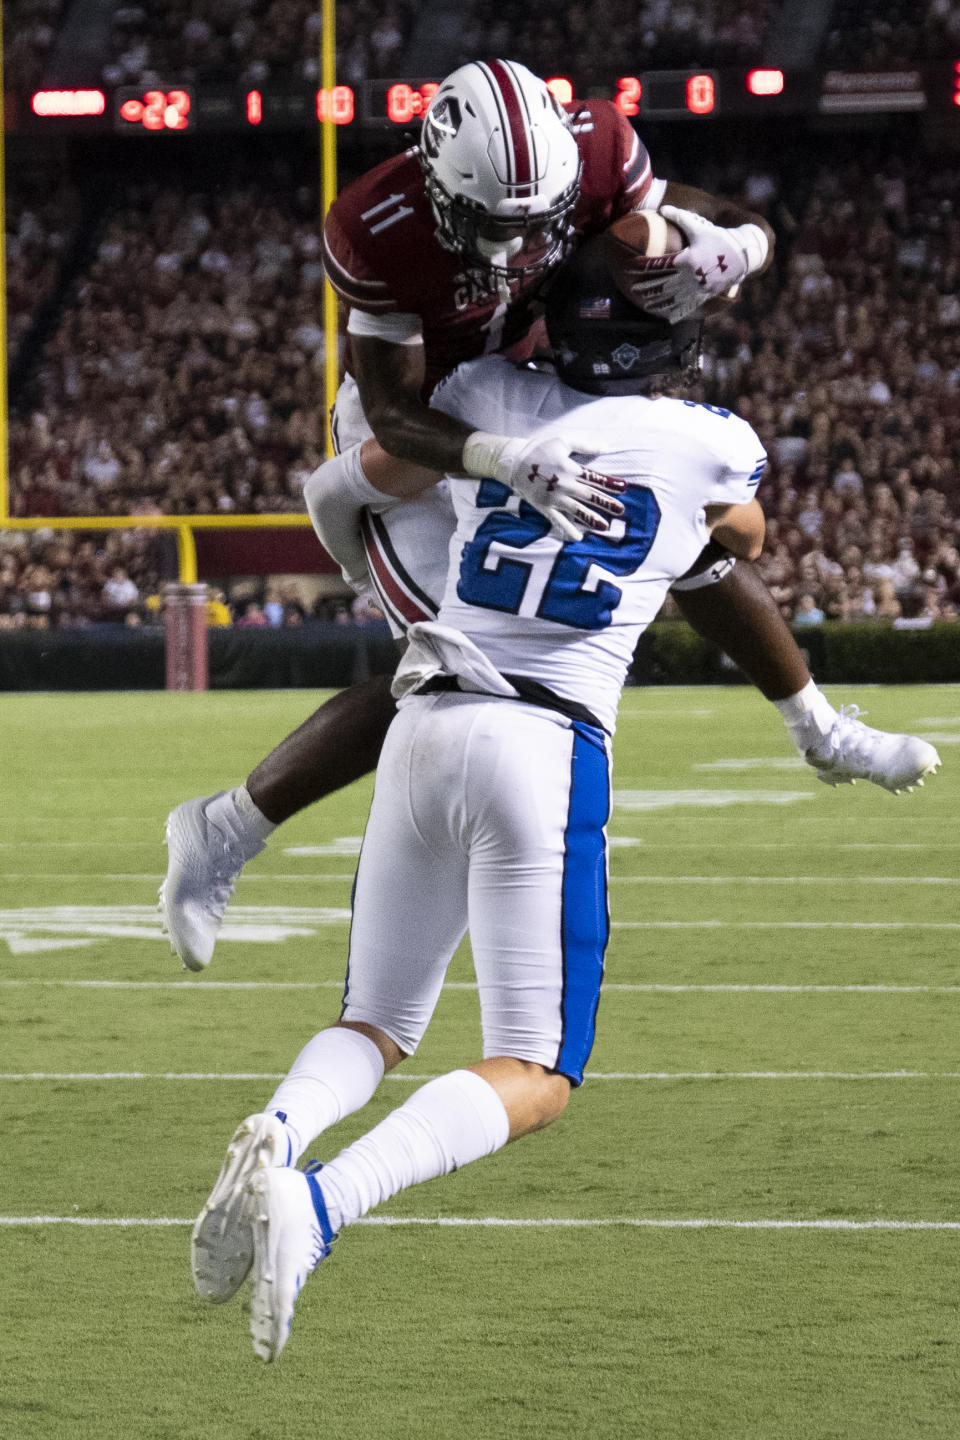 South Carolina running back ZaQuandre White (11) leaps for a touchdown over Eastern Illinoi safety Kaelin Drakeford (22) during the first half of an NCAA college football game on Saturday, Sept. 4, 2021, in Columbia, S.C. (AP Photo/Hakim Wright Sr.)